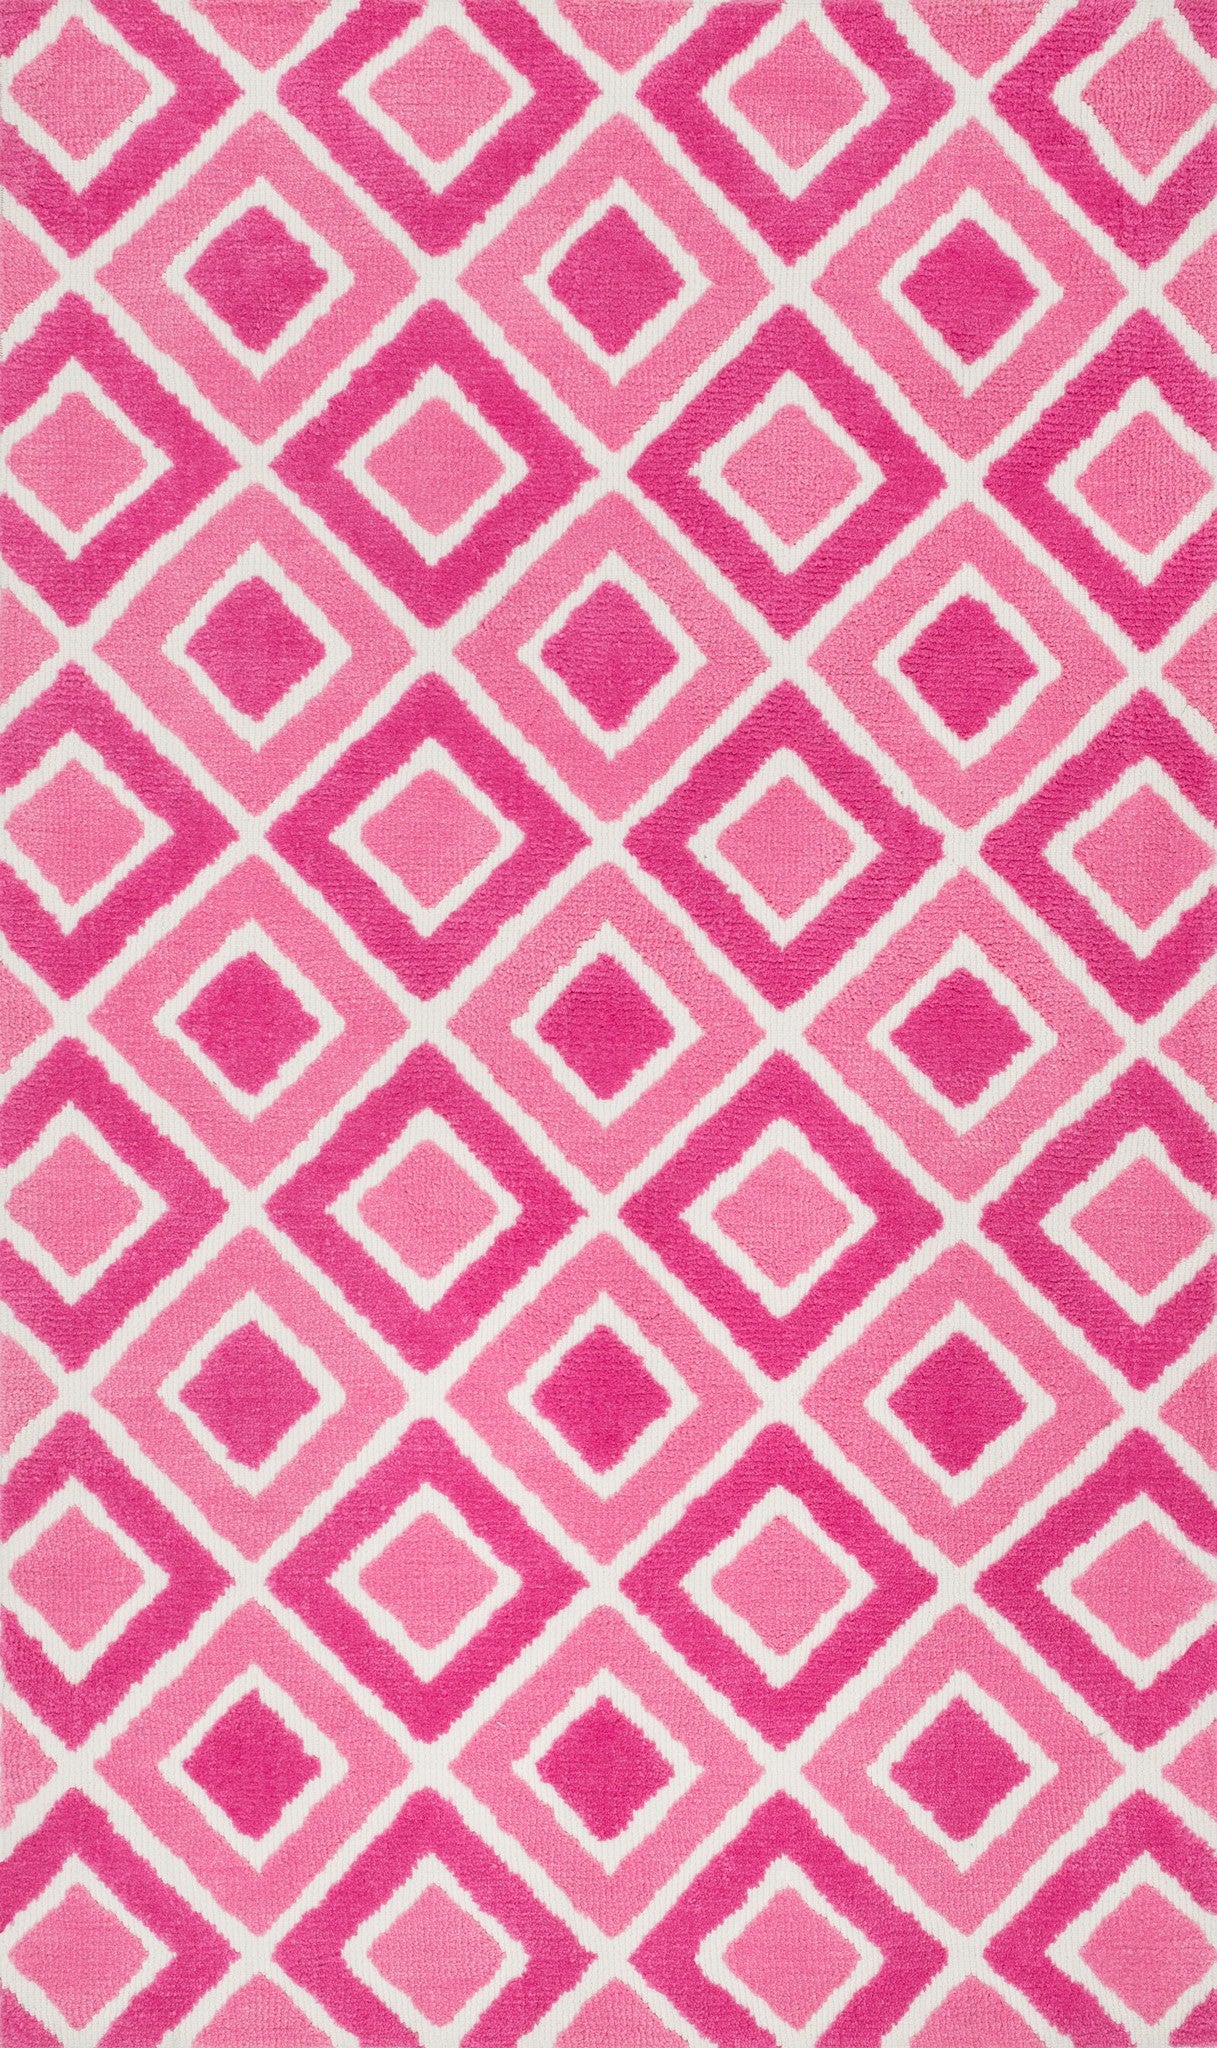 Loloi Zoey HZO04 Pink Area Rug main image